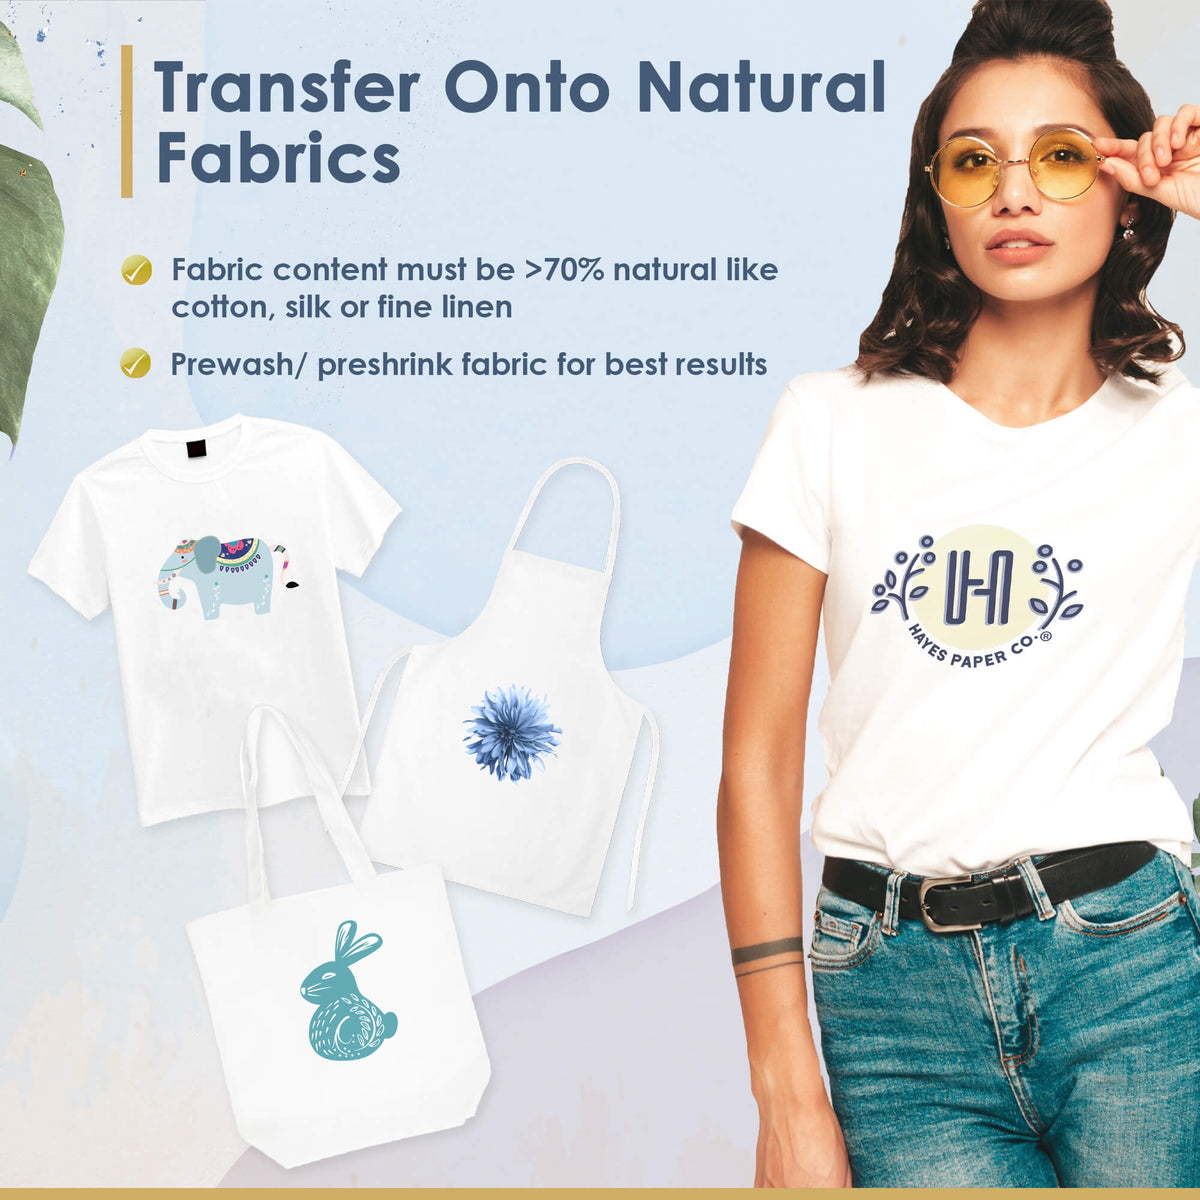 Hayes Paper Co.® Transparent Heat Transfer Paper